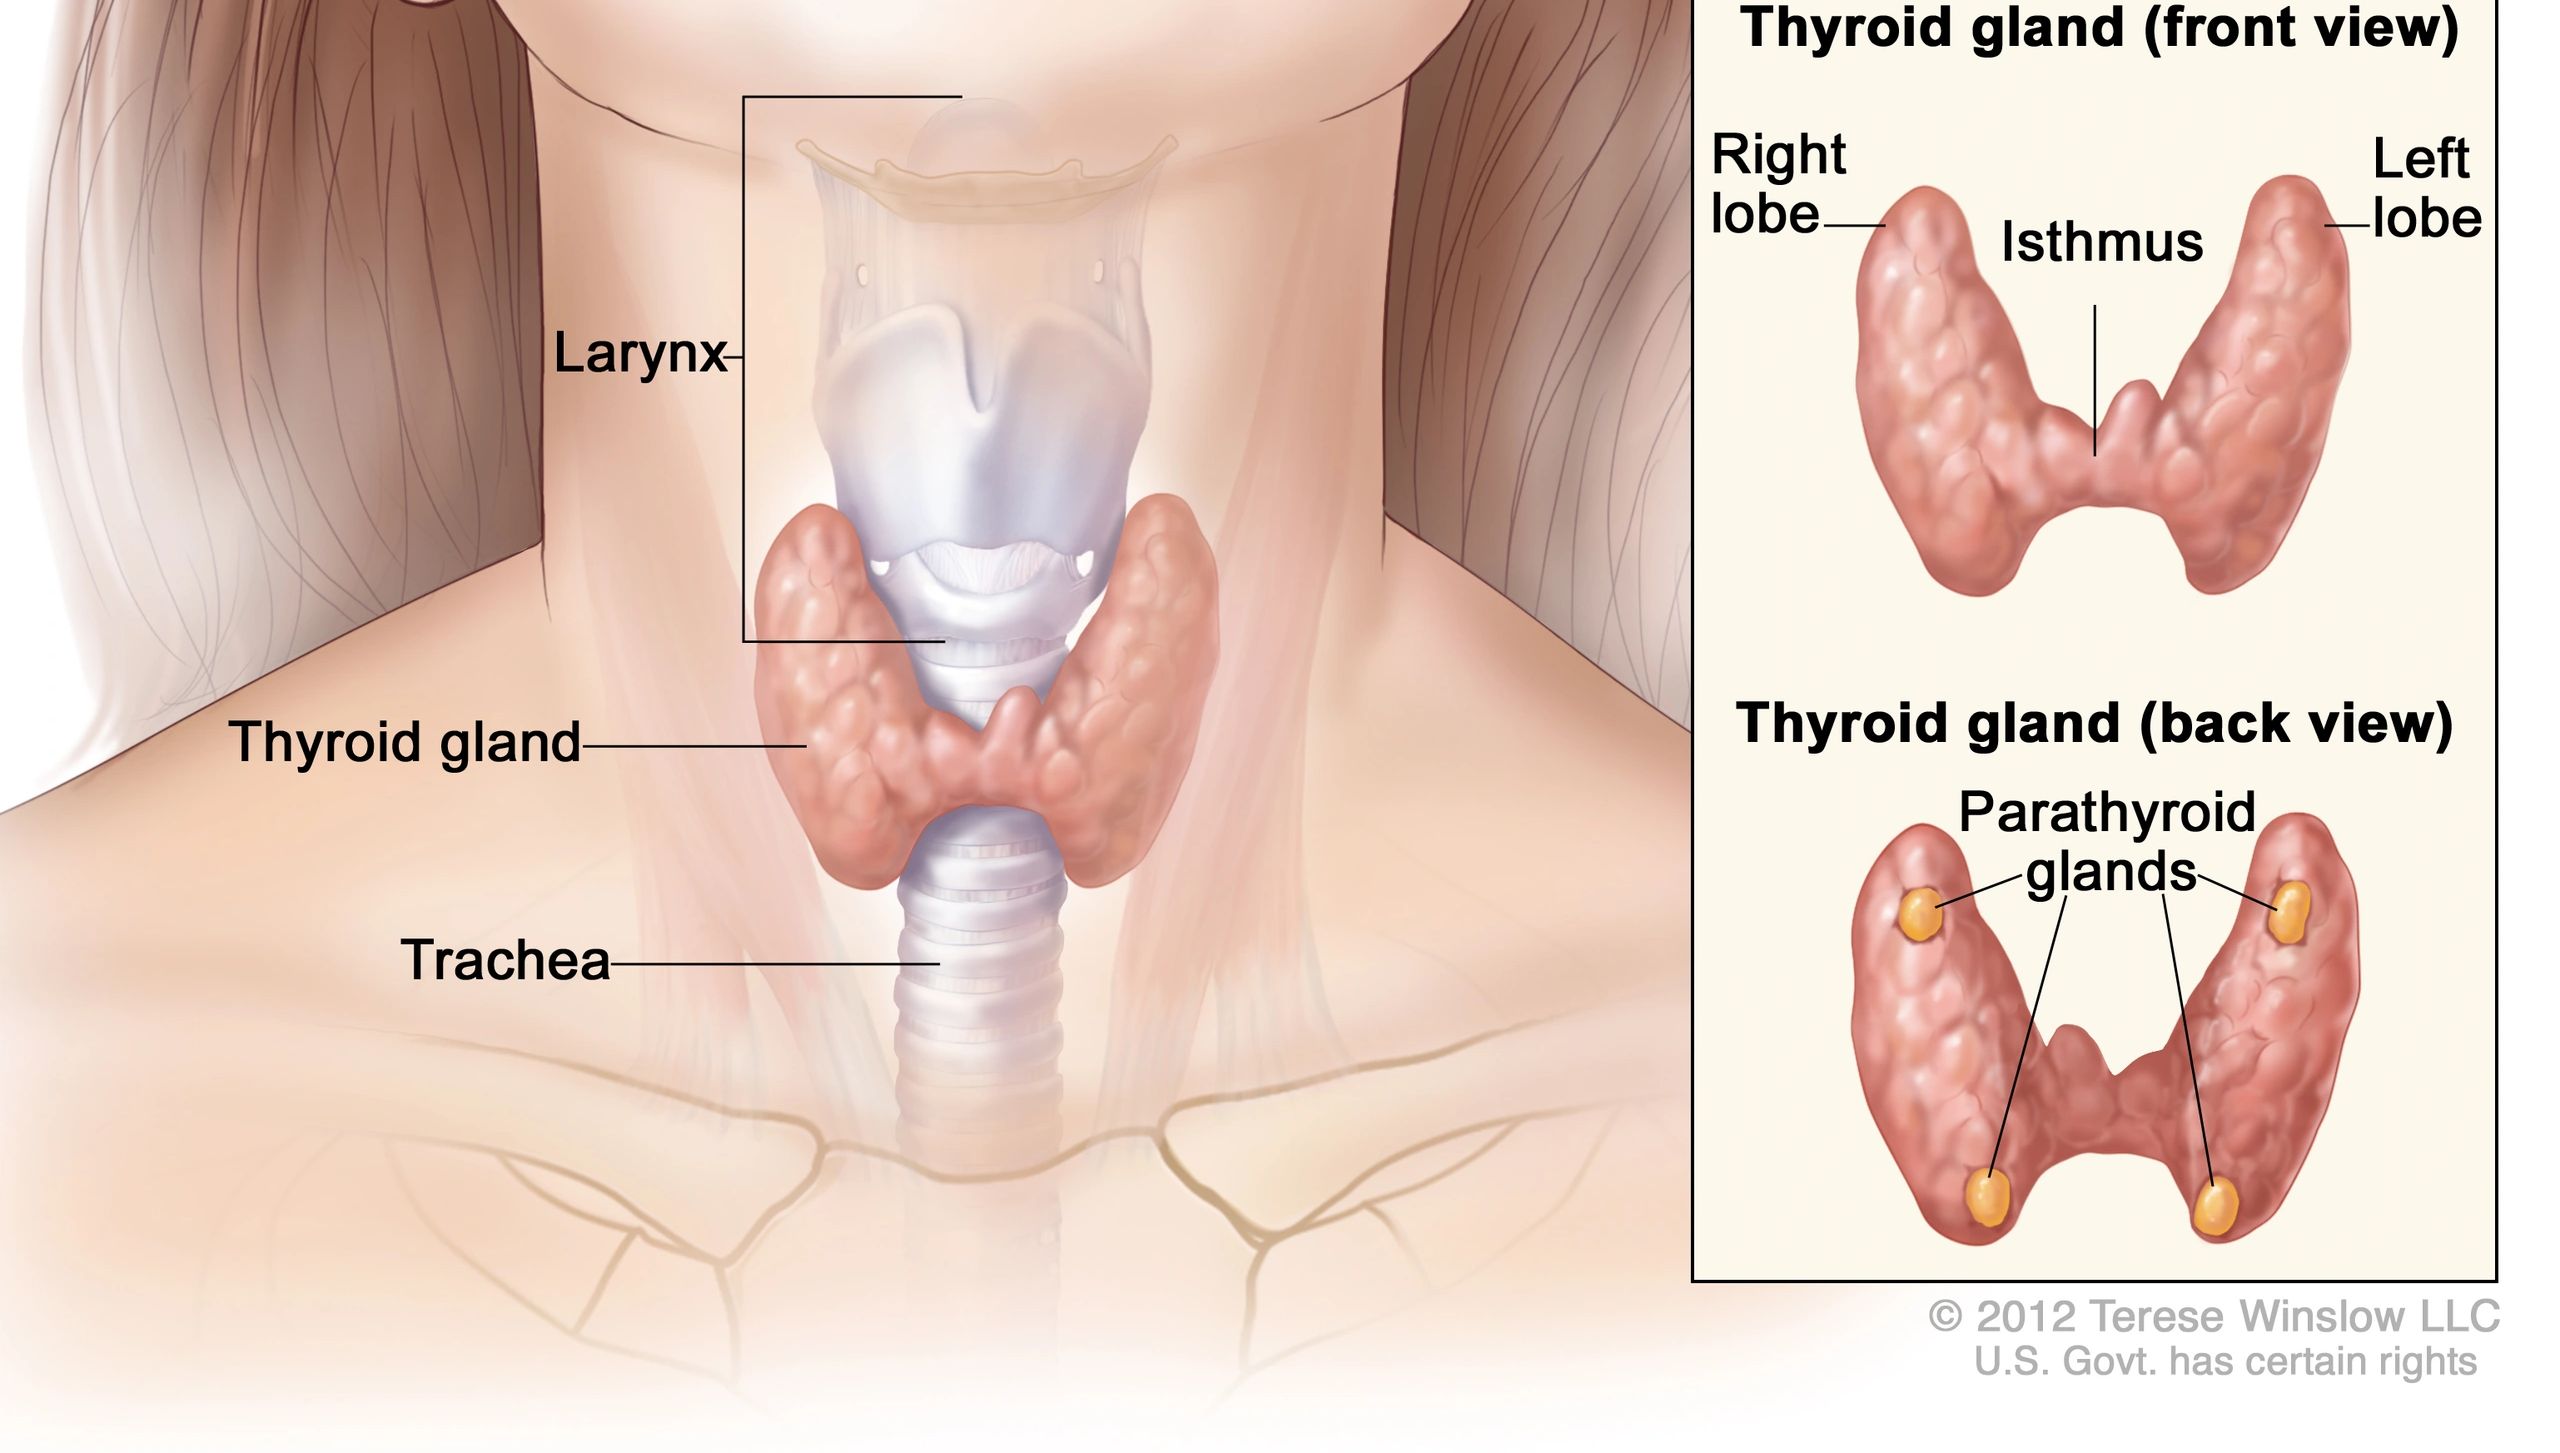 thyroid gland images